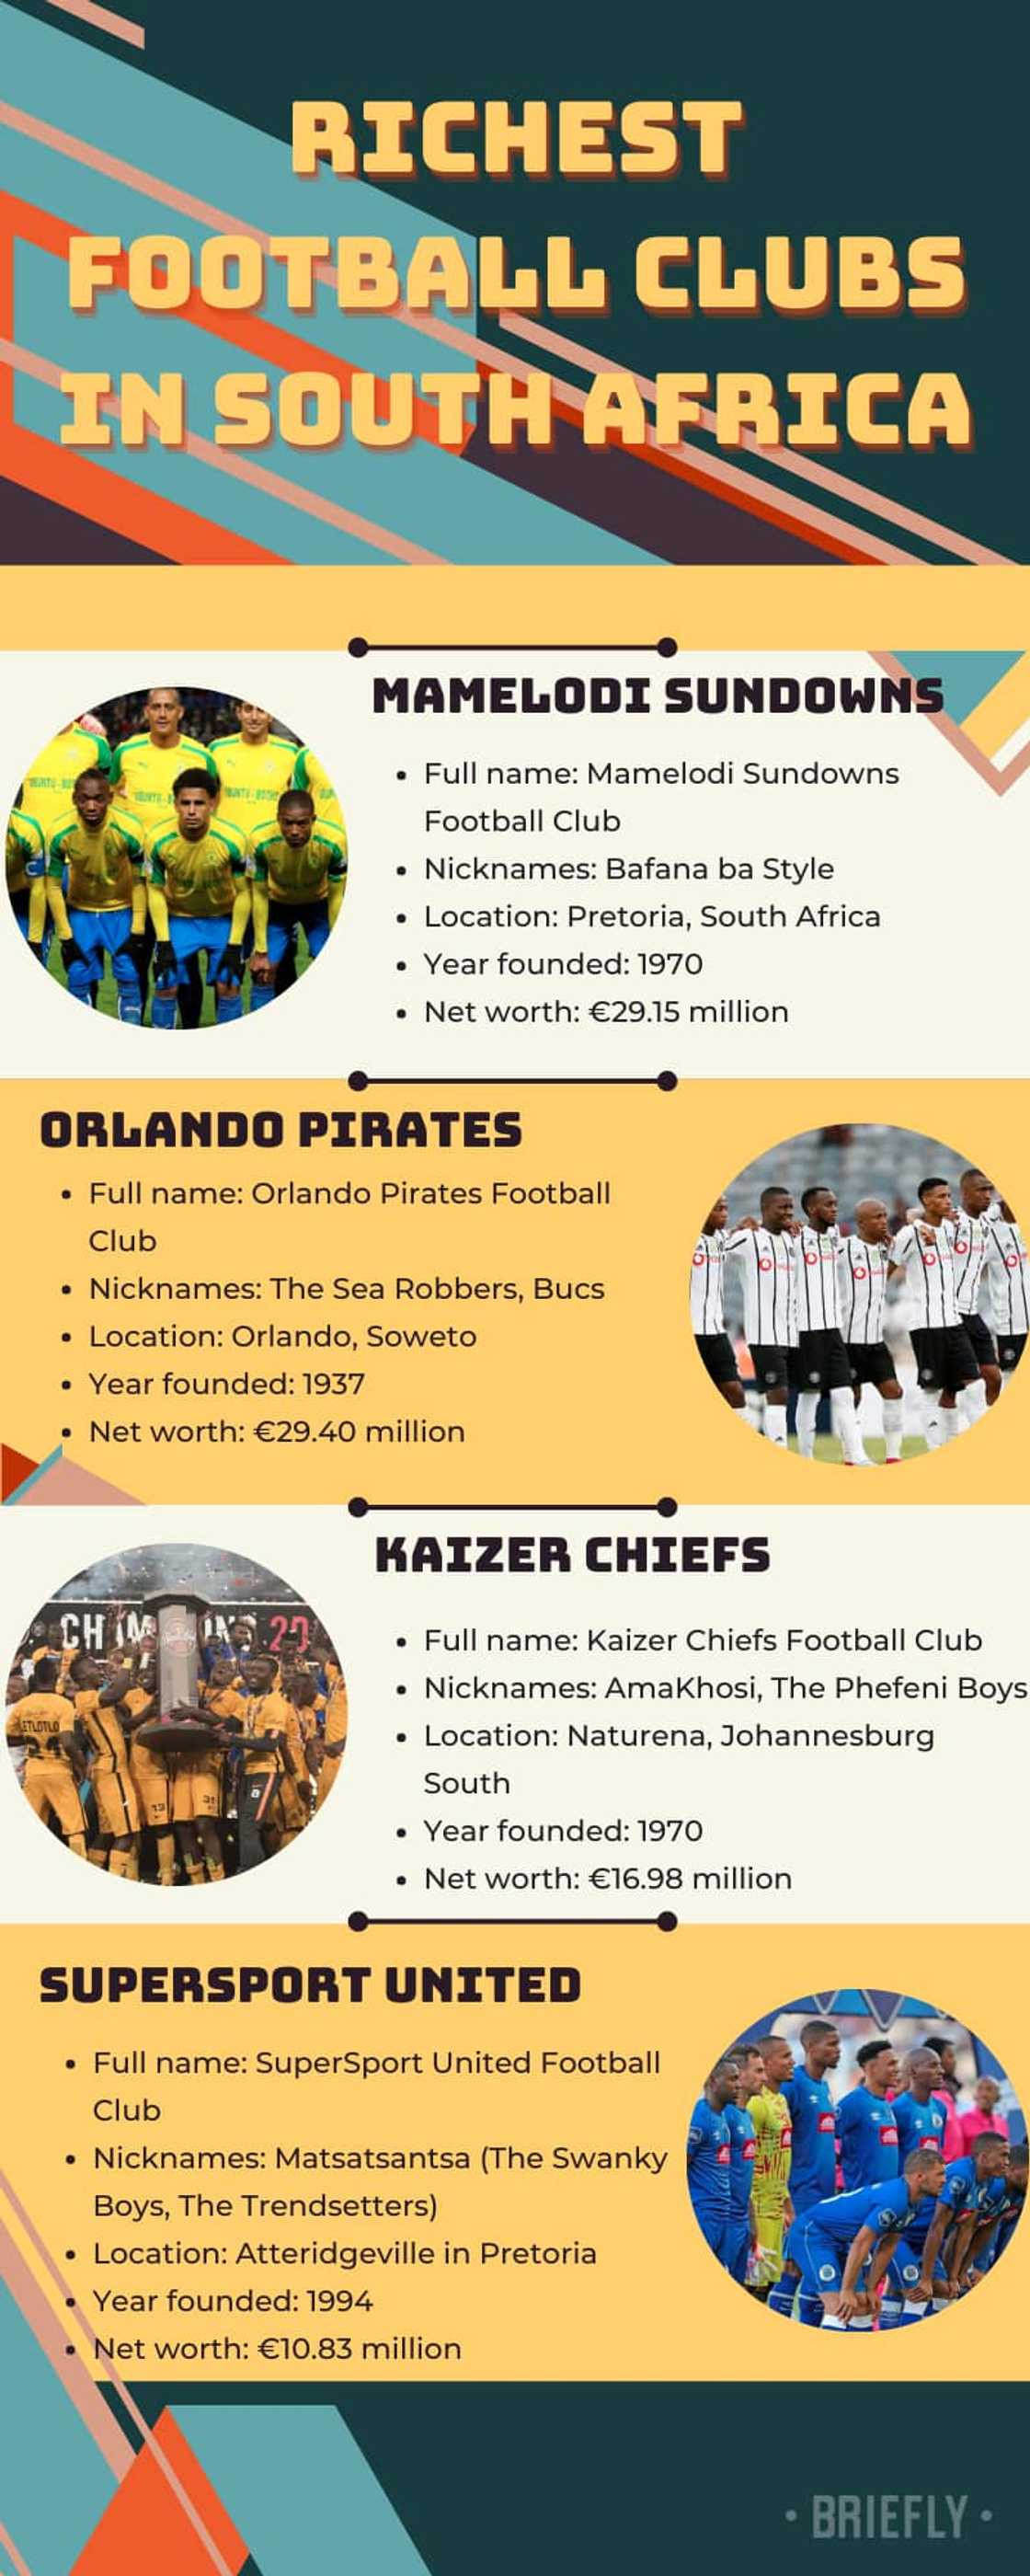 Richest football clubs in South Africa